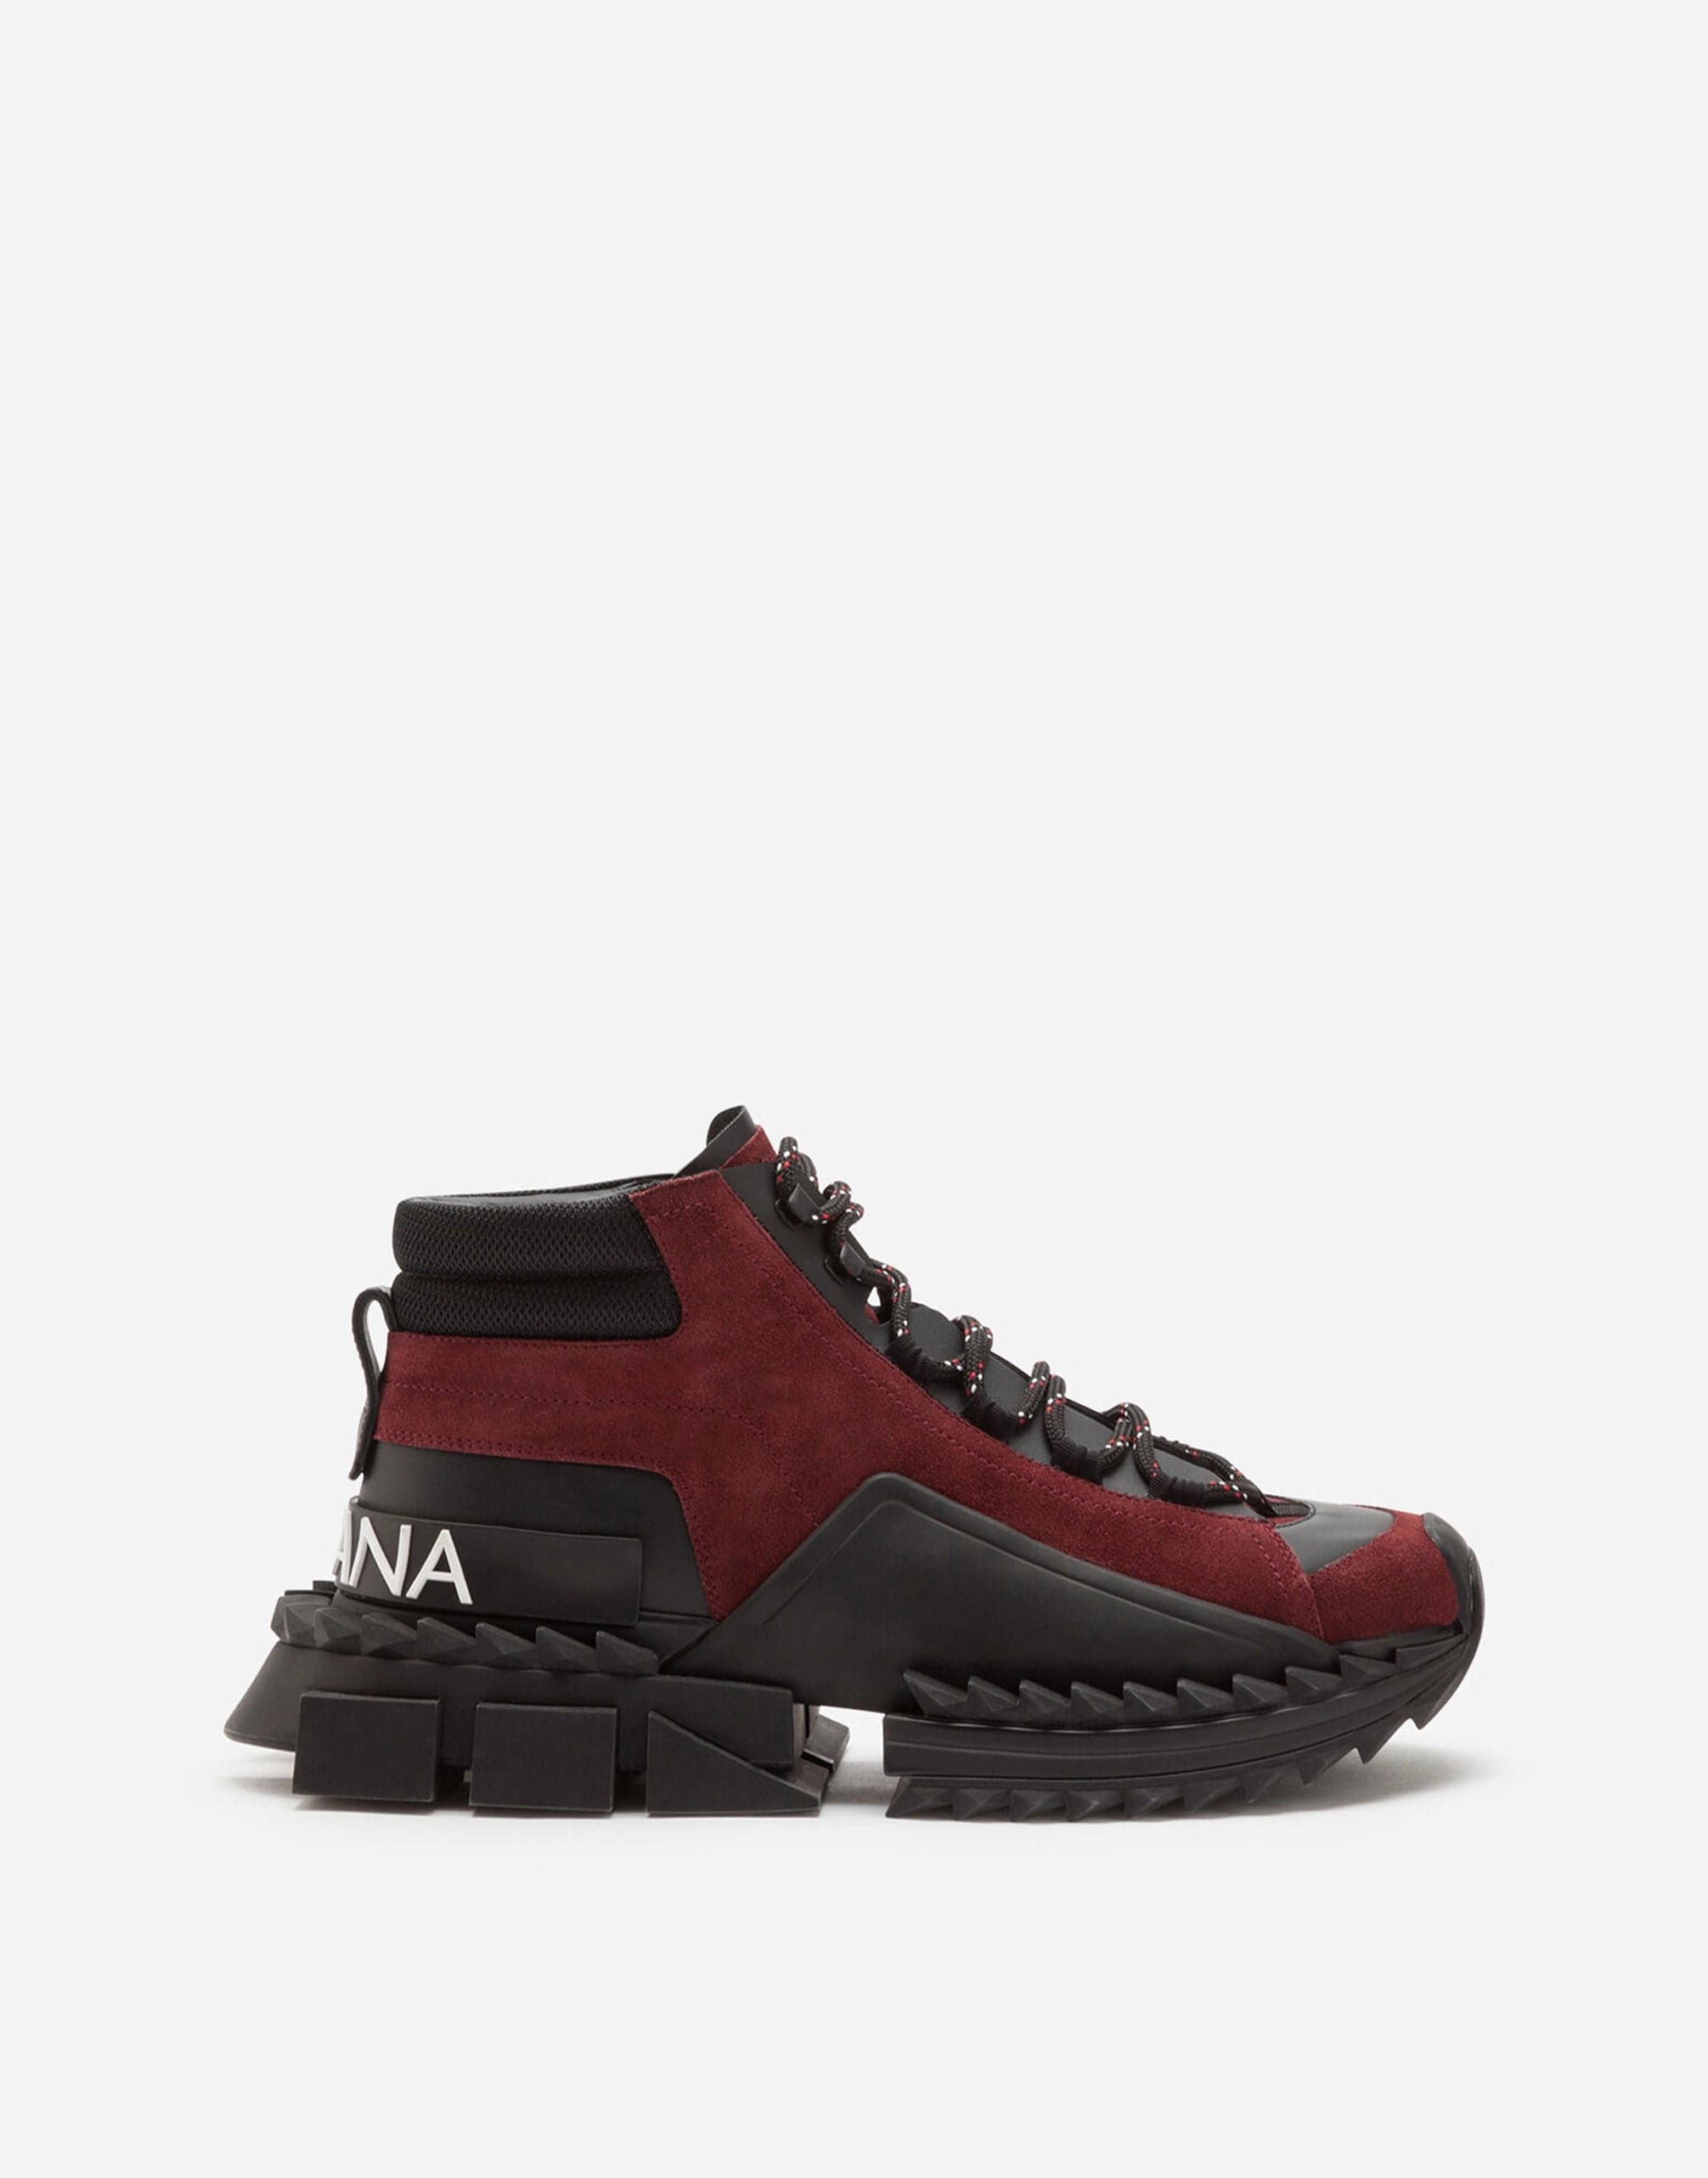 Dolce & Gabbana Leather Super King High-Top Sneakers